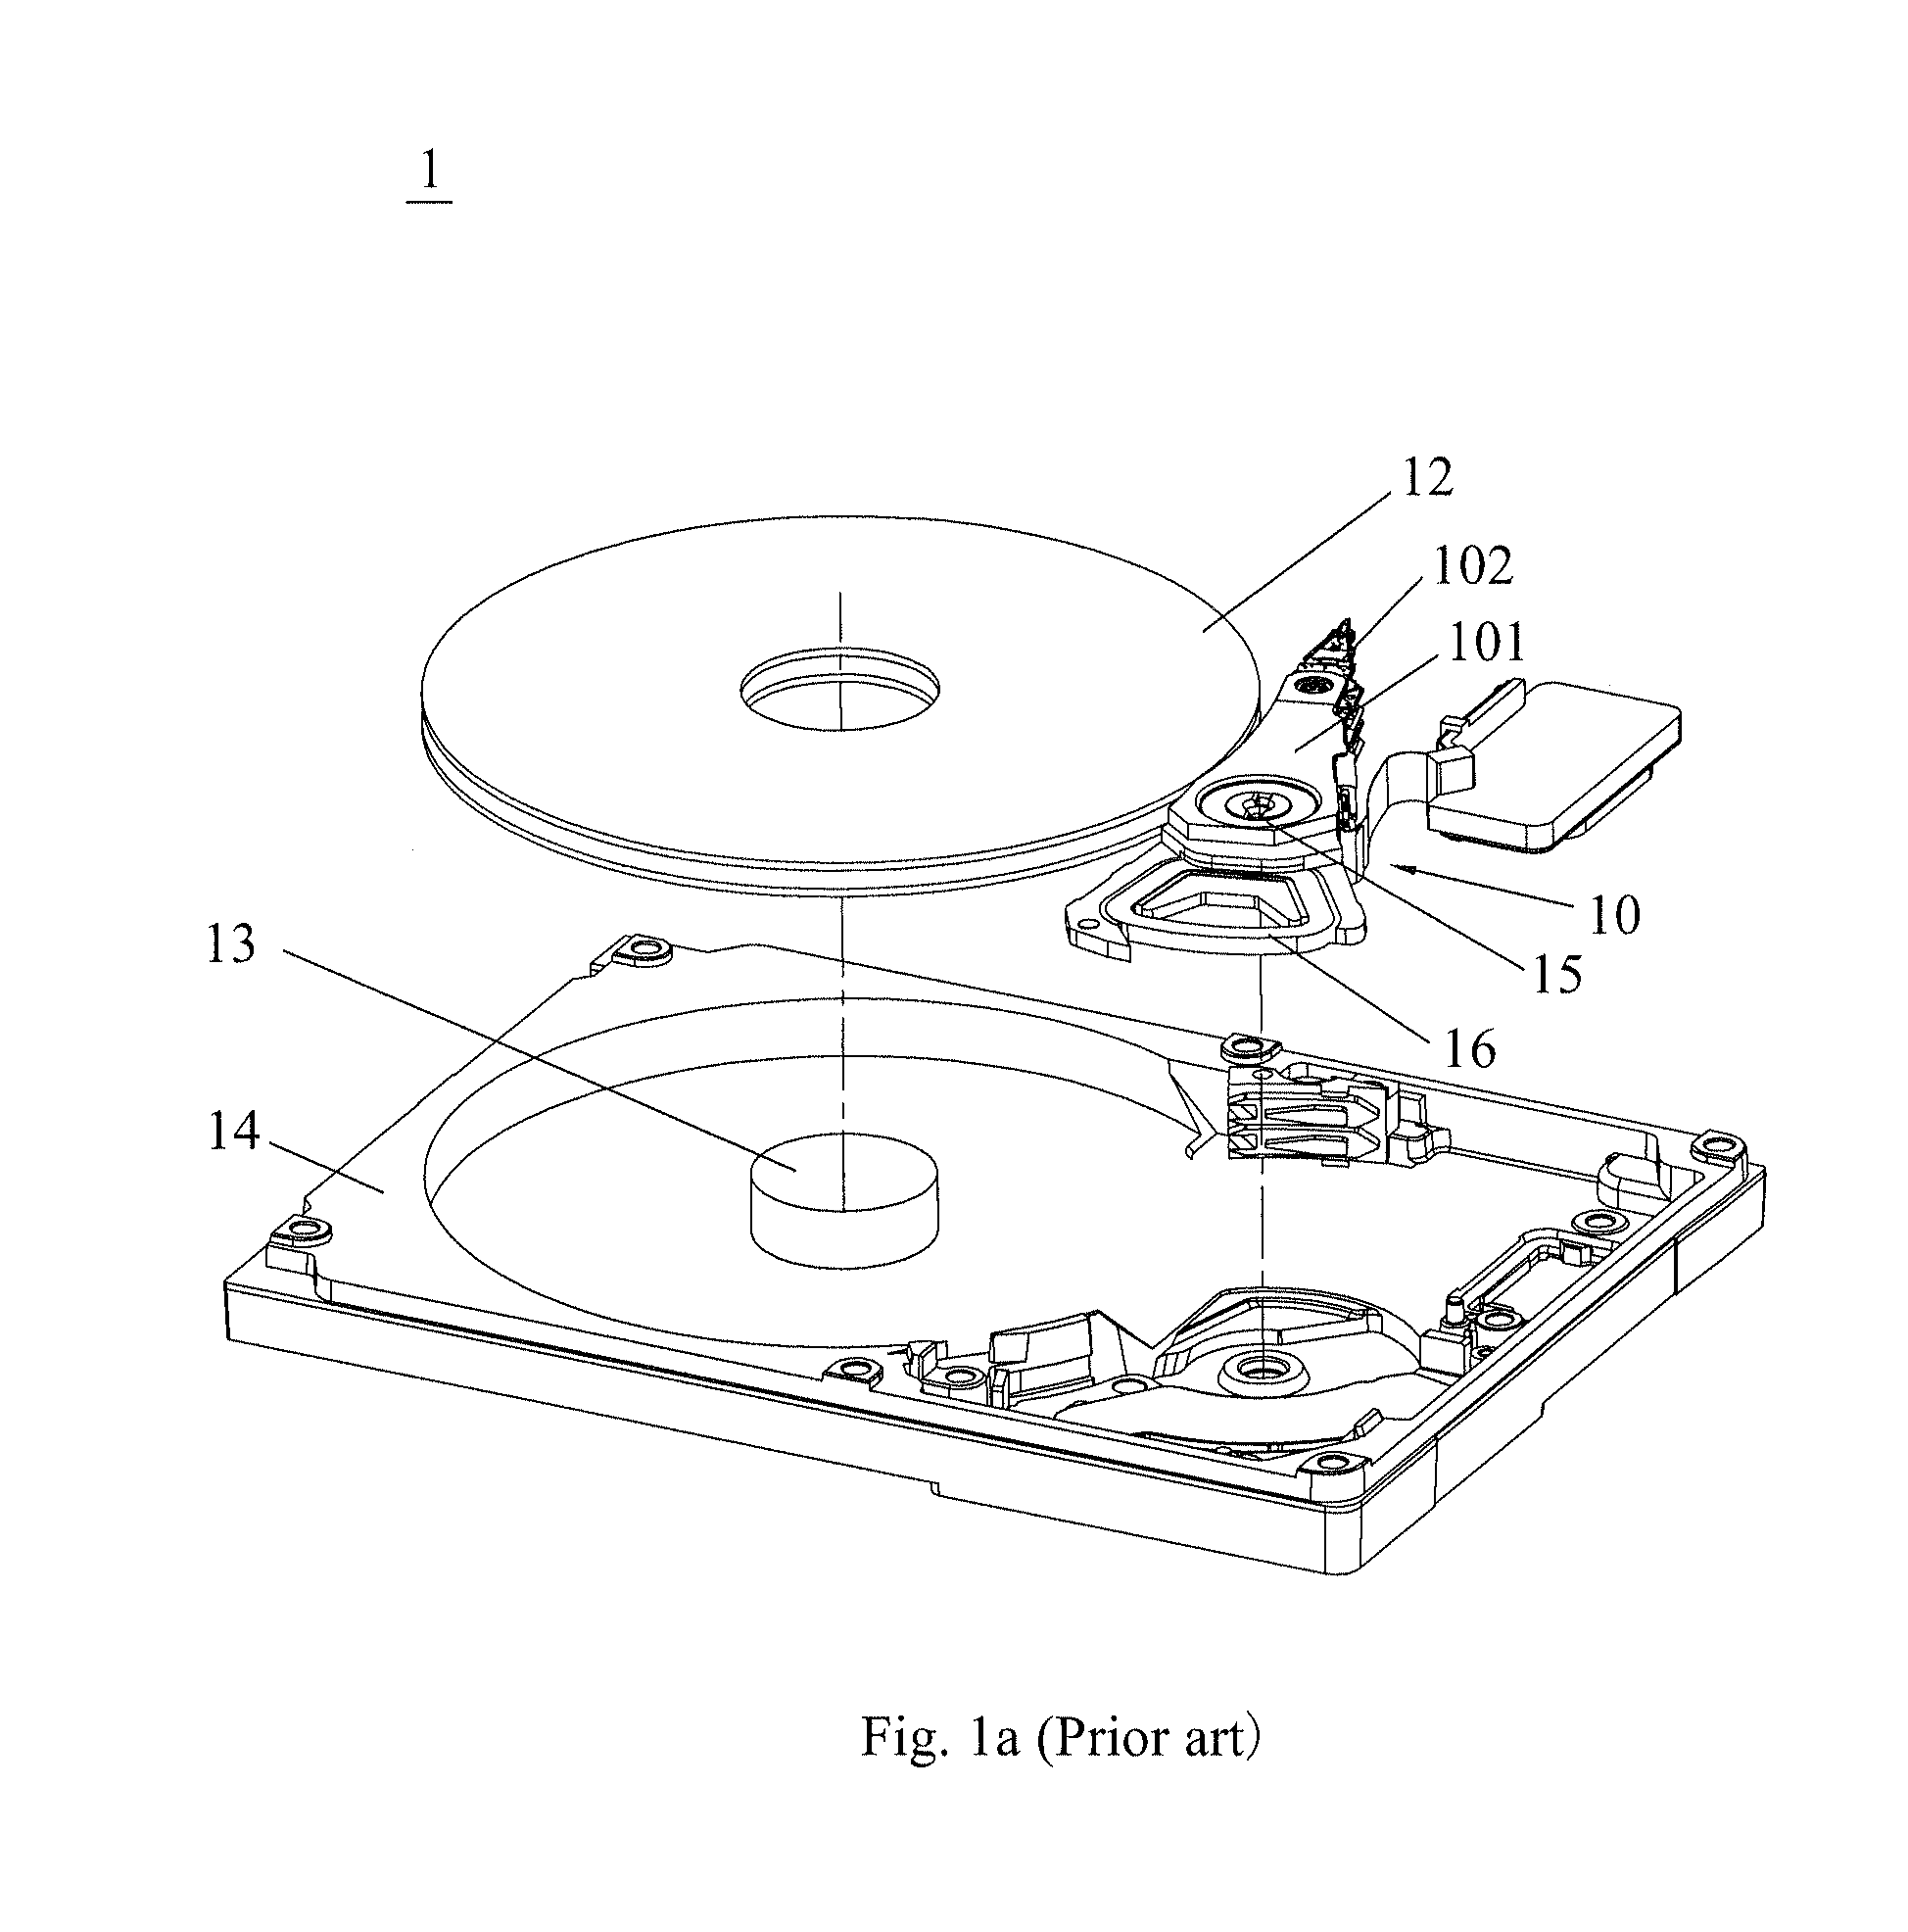 Apparatus for disconnecting solder joints between two welded surfaces